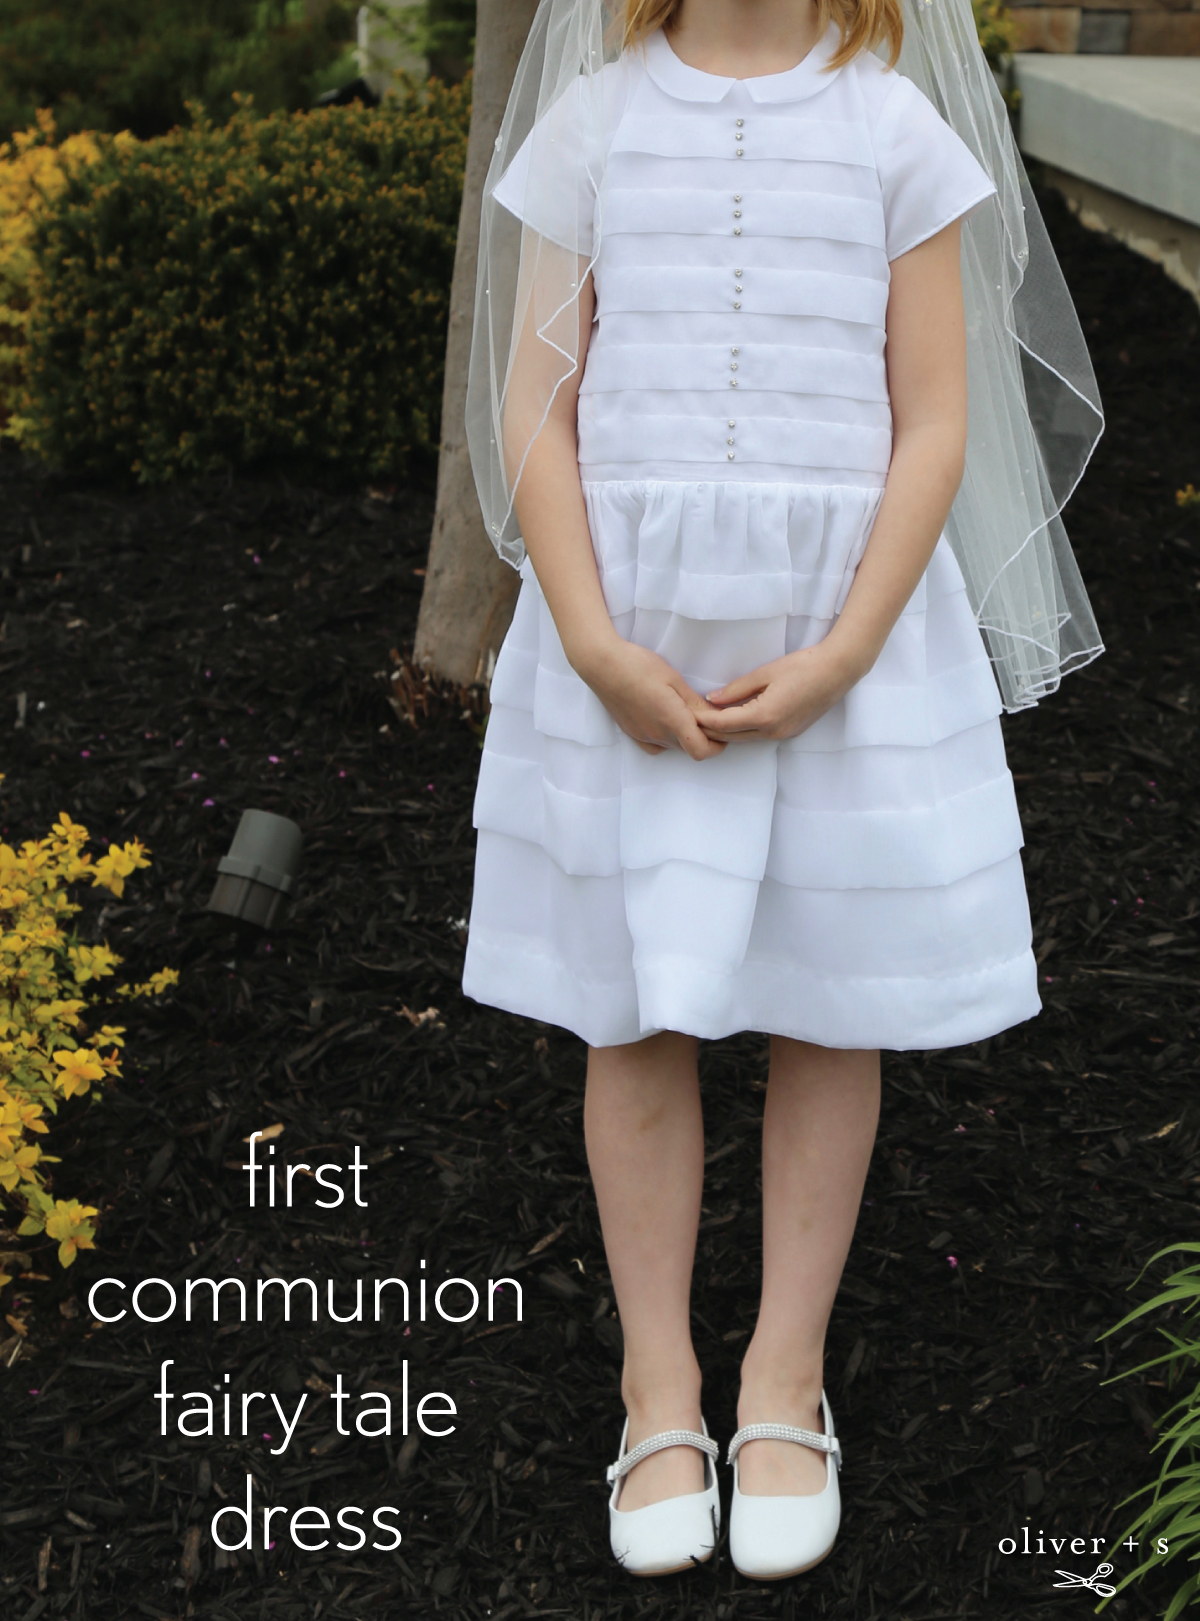 dress for first communion mother